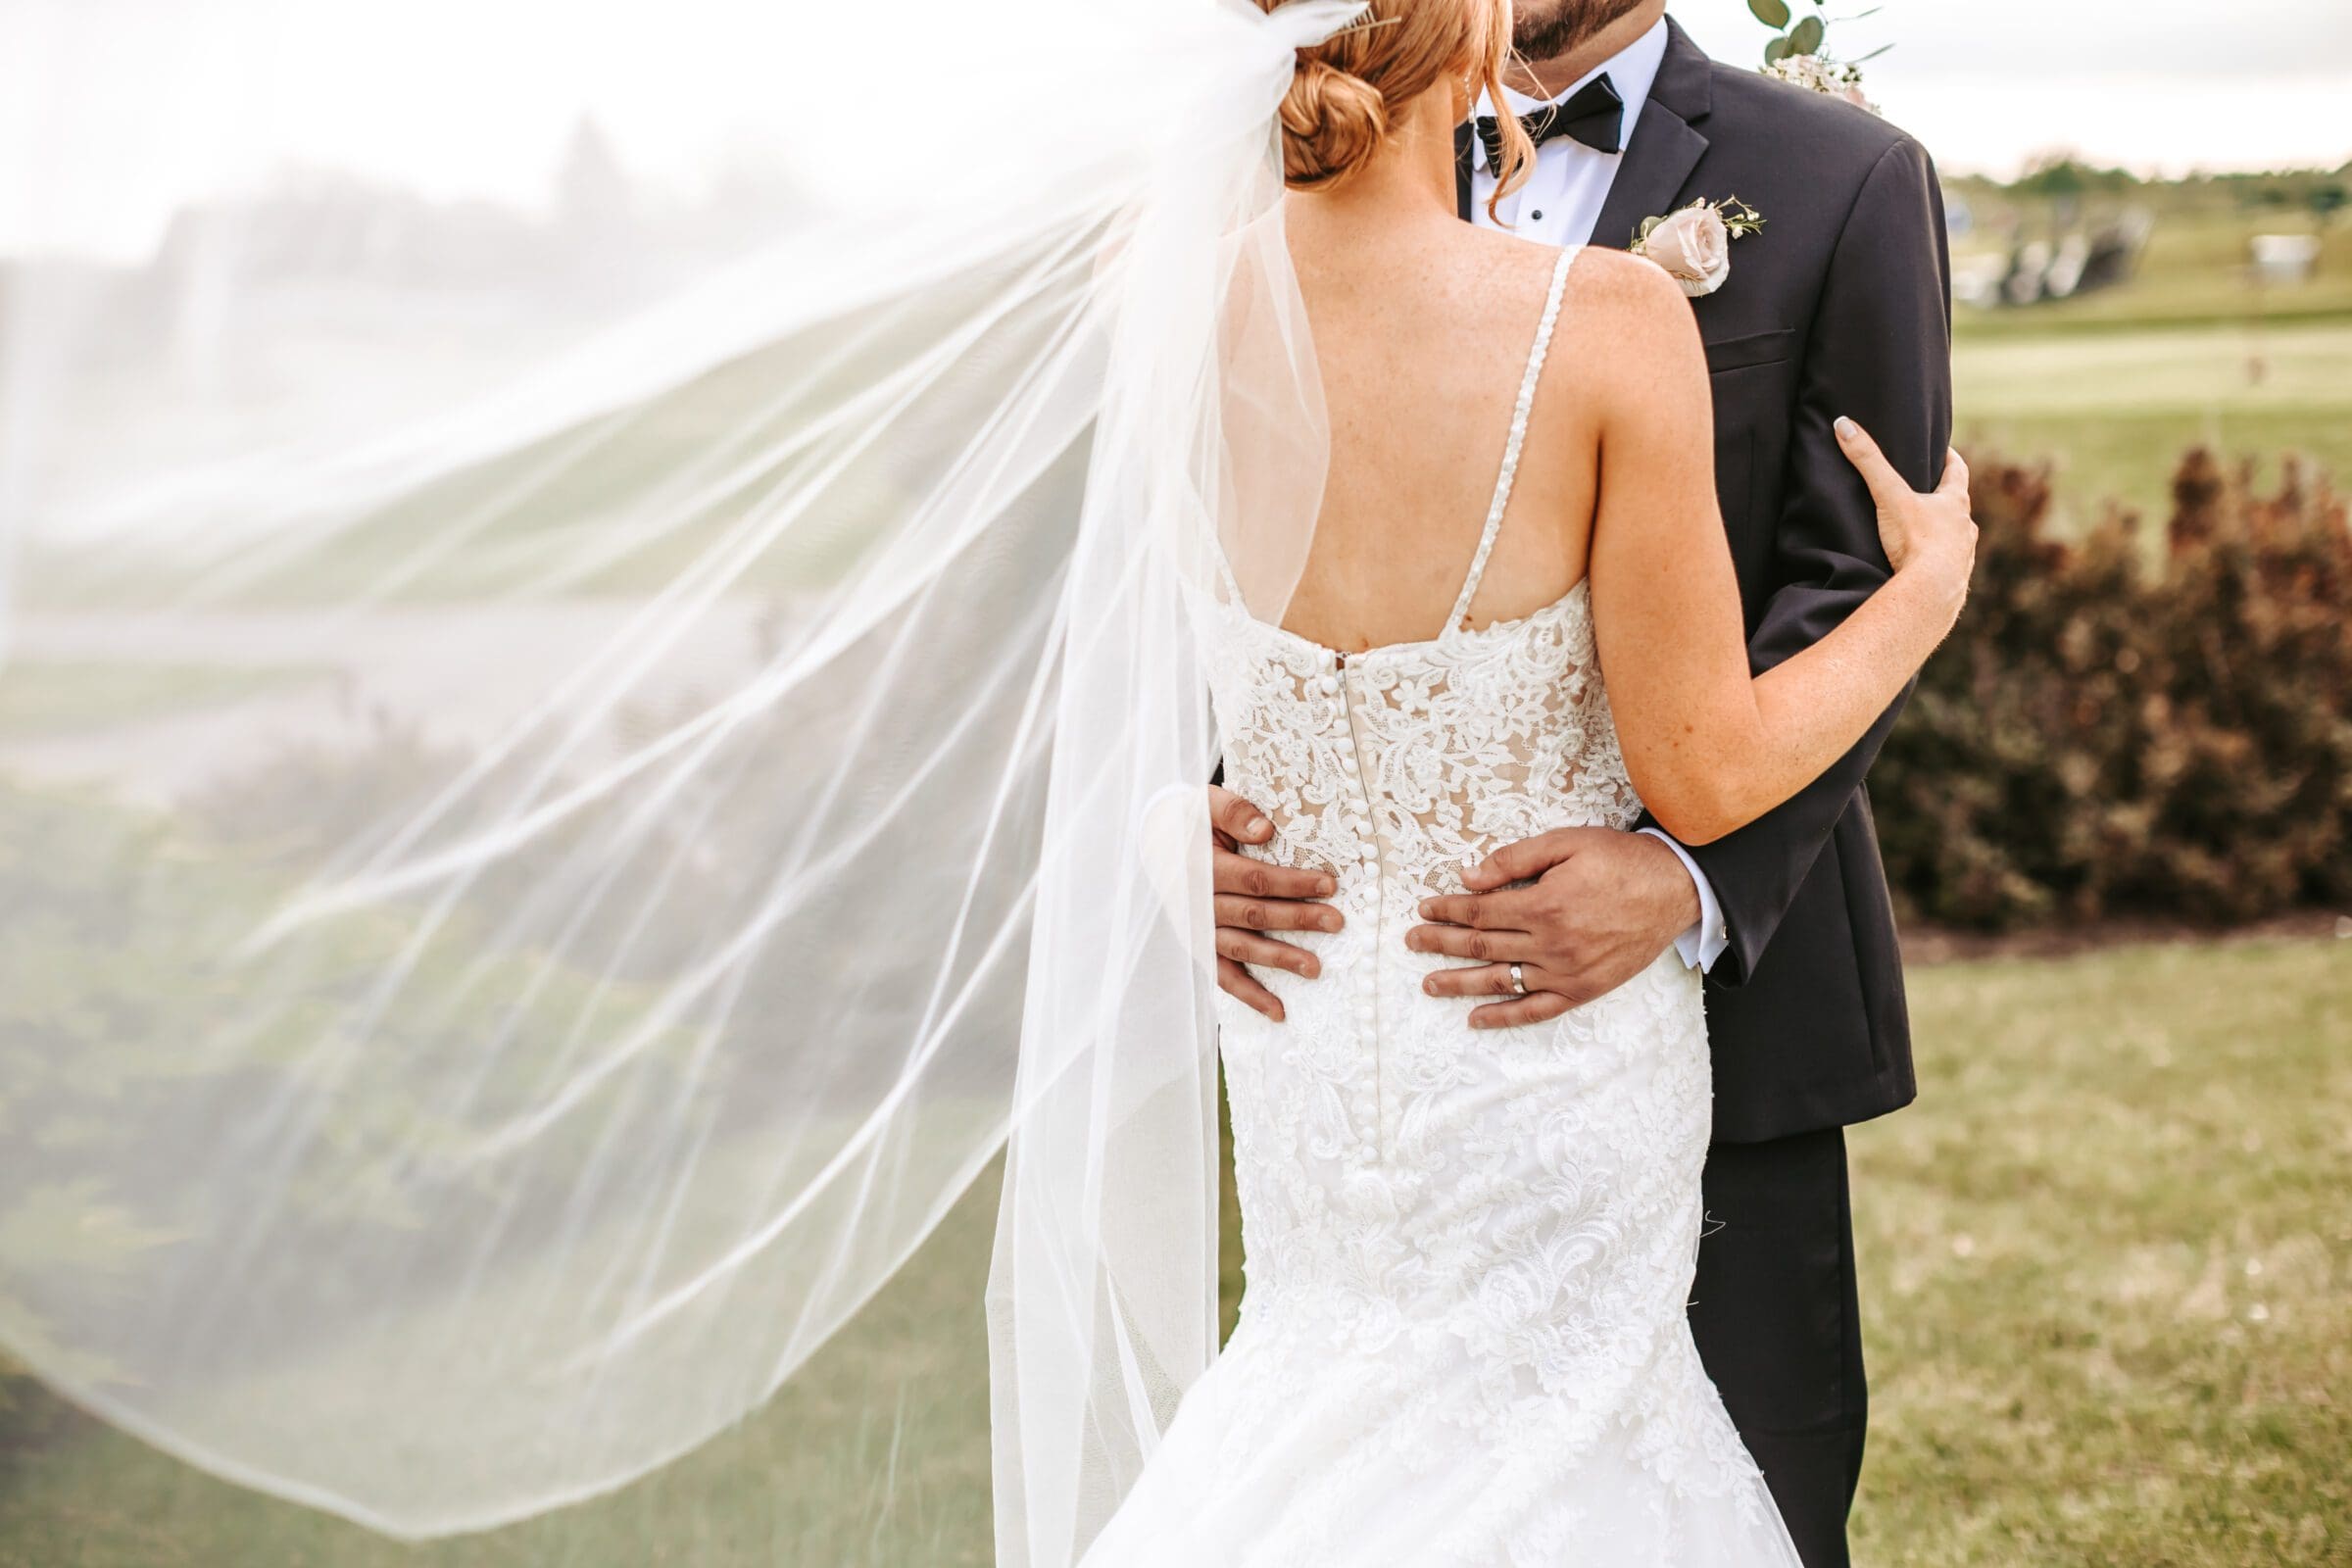 Cropped image of bride and groom from behind